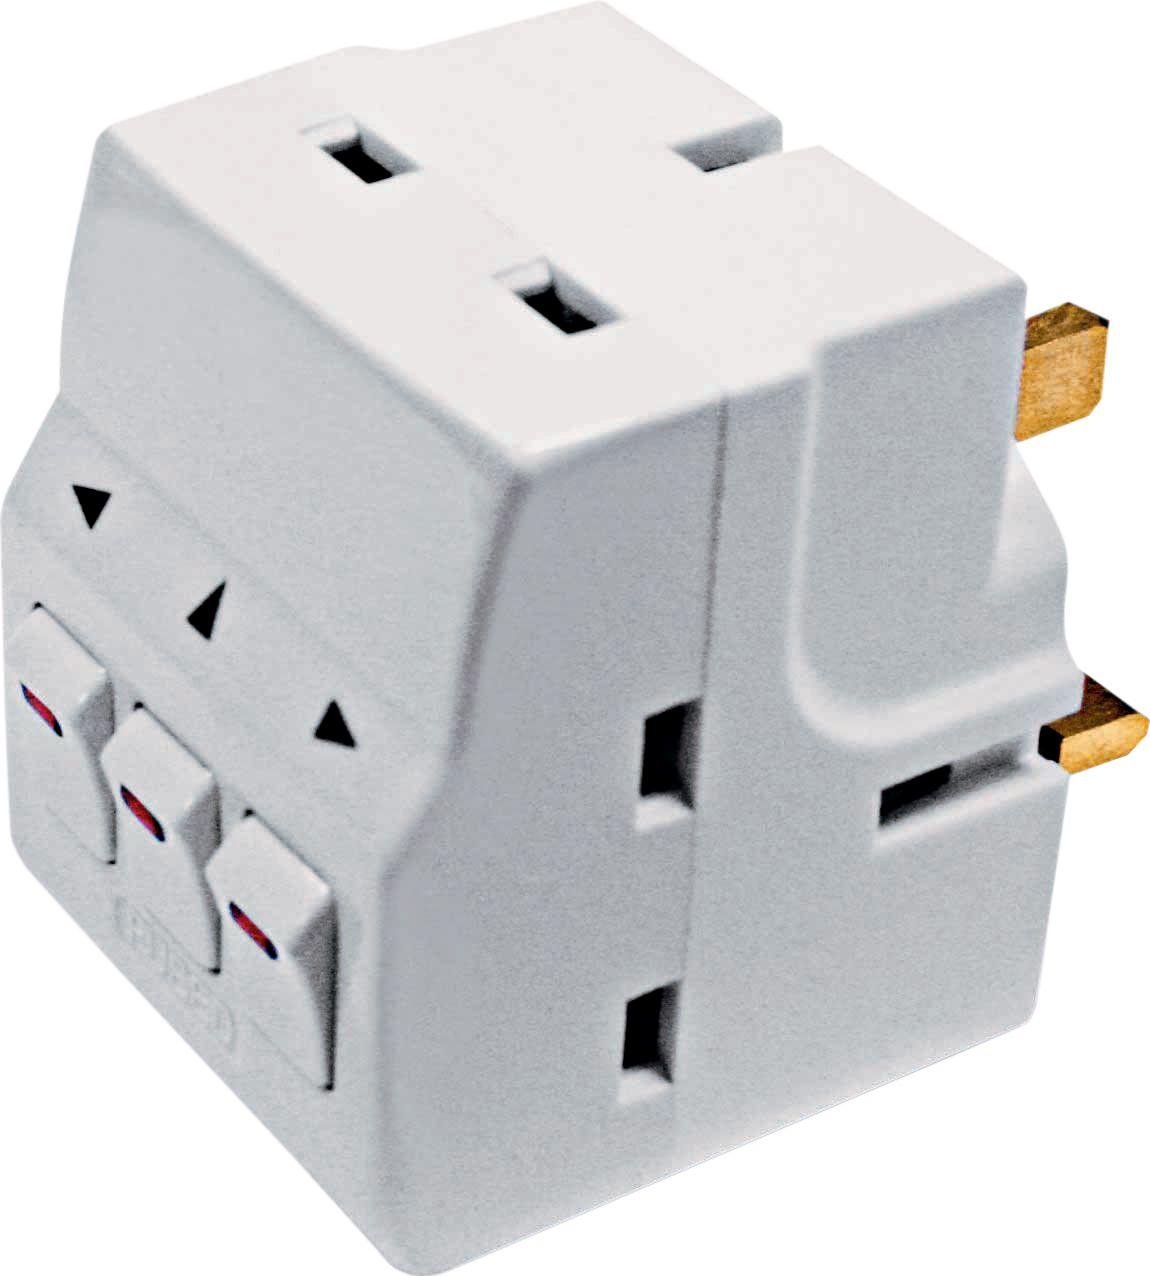 Masterplug - 3-Way Individually Switched Adaptor Review